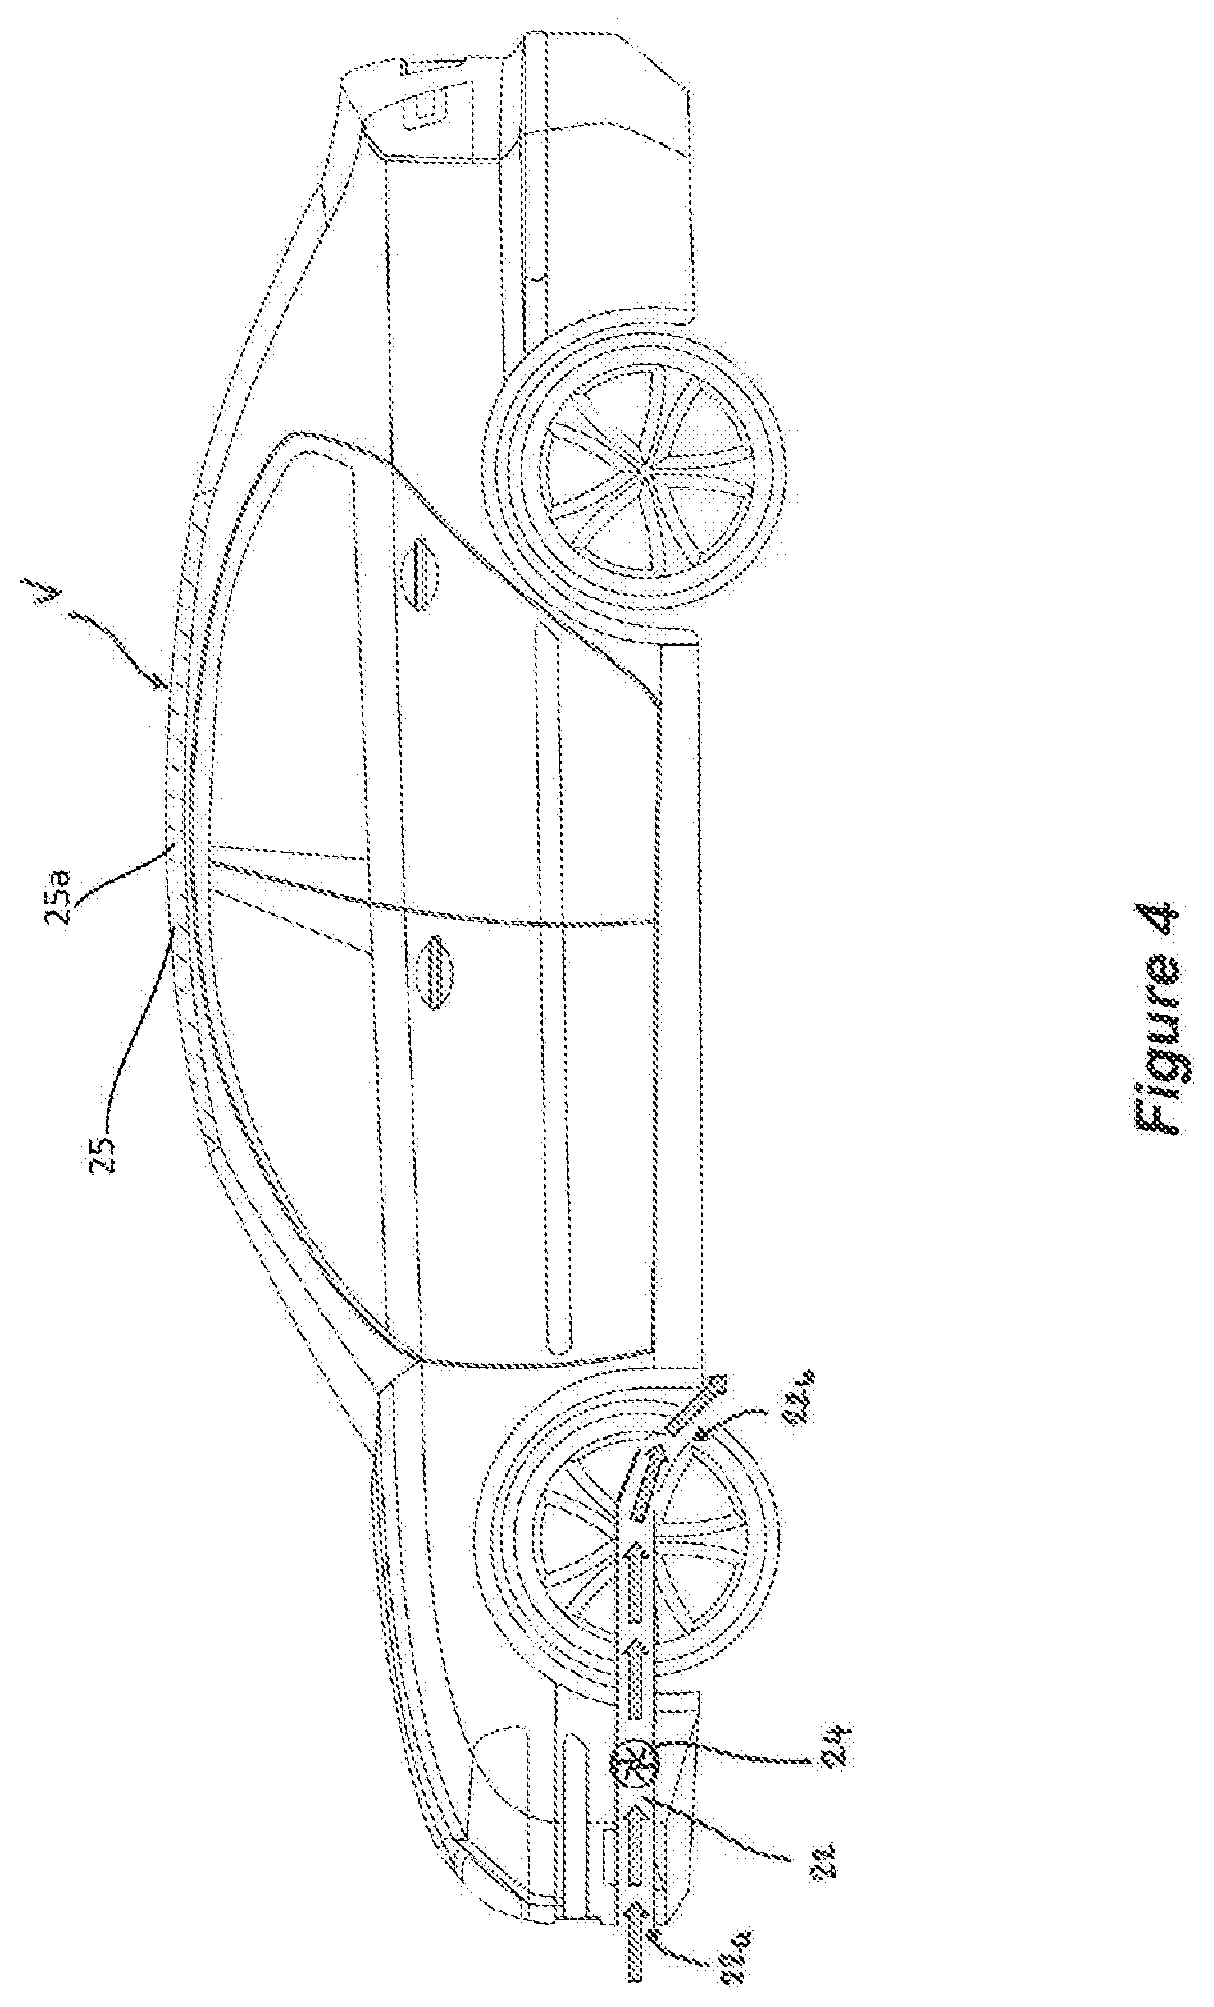 A System and Method for Enhanced Operation of Electric Vehicles